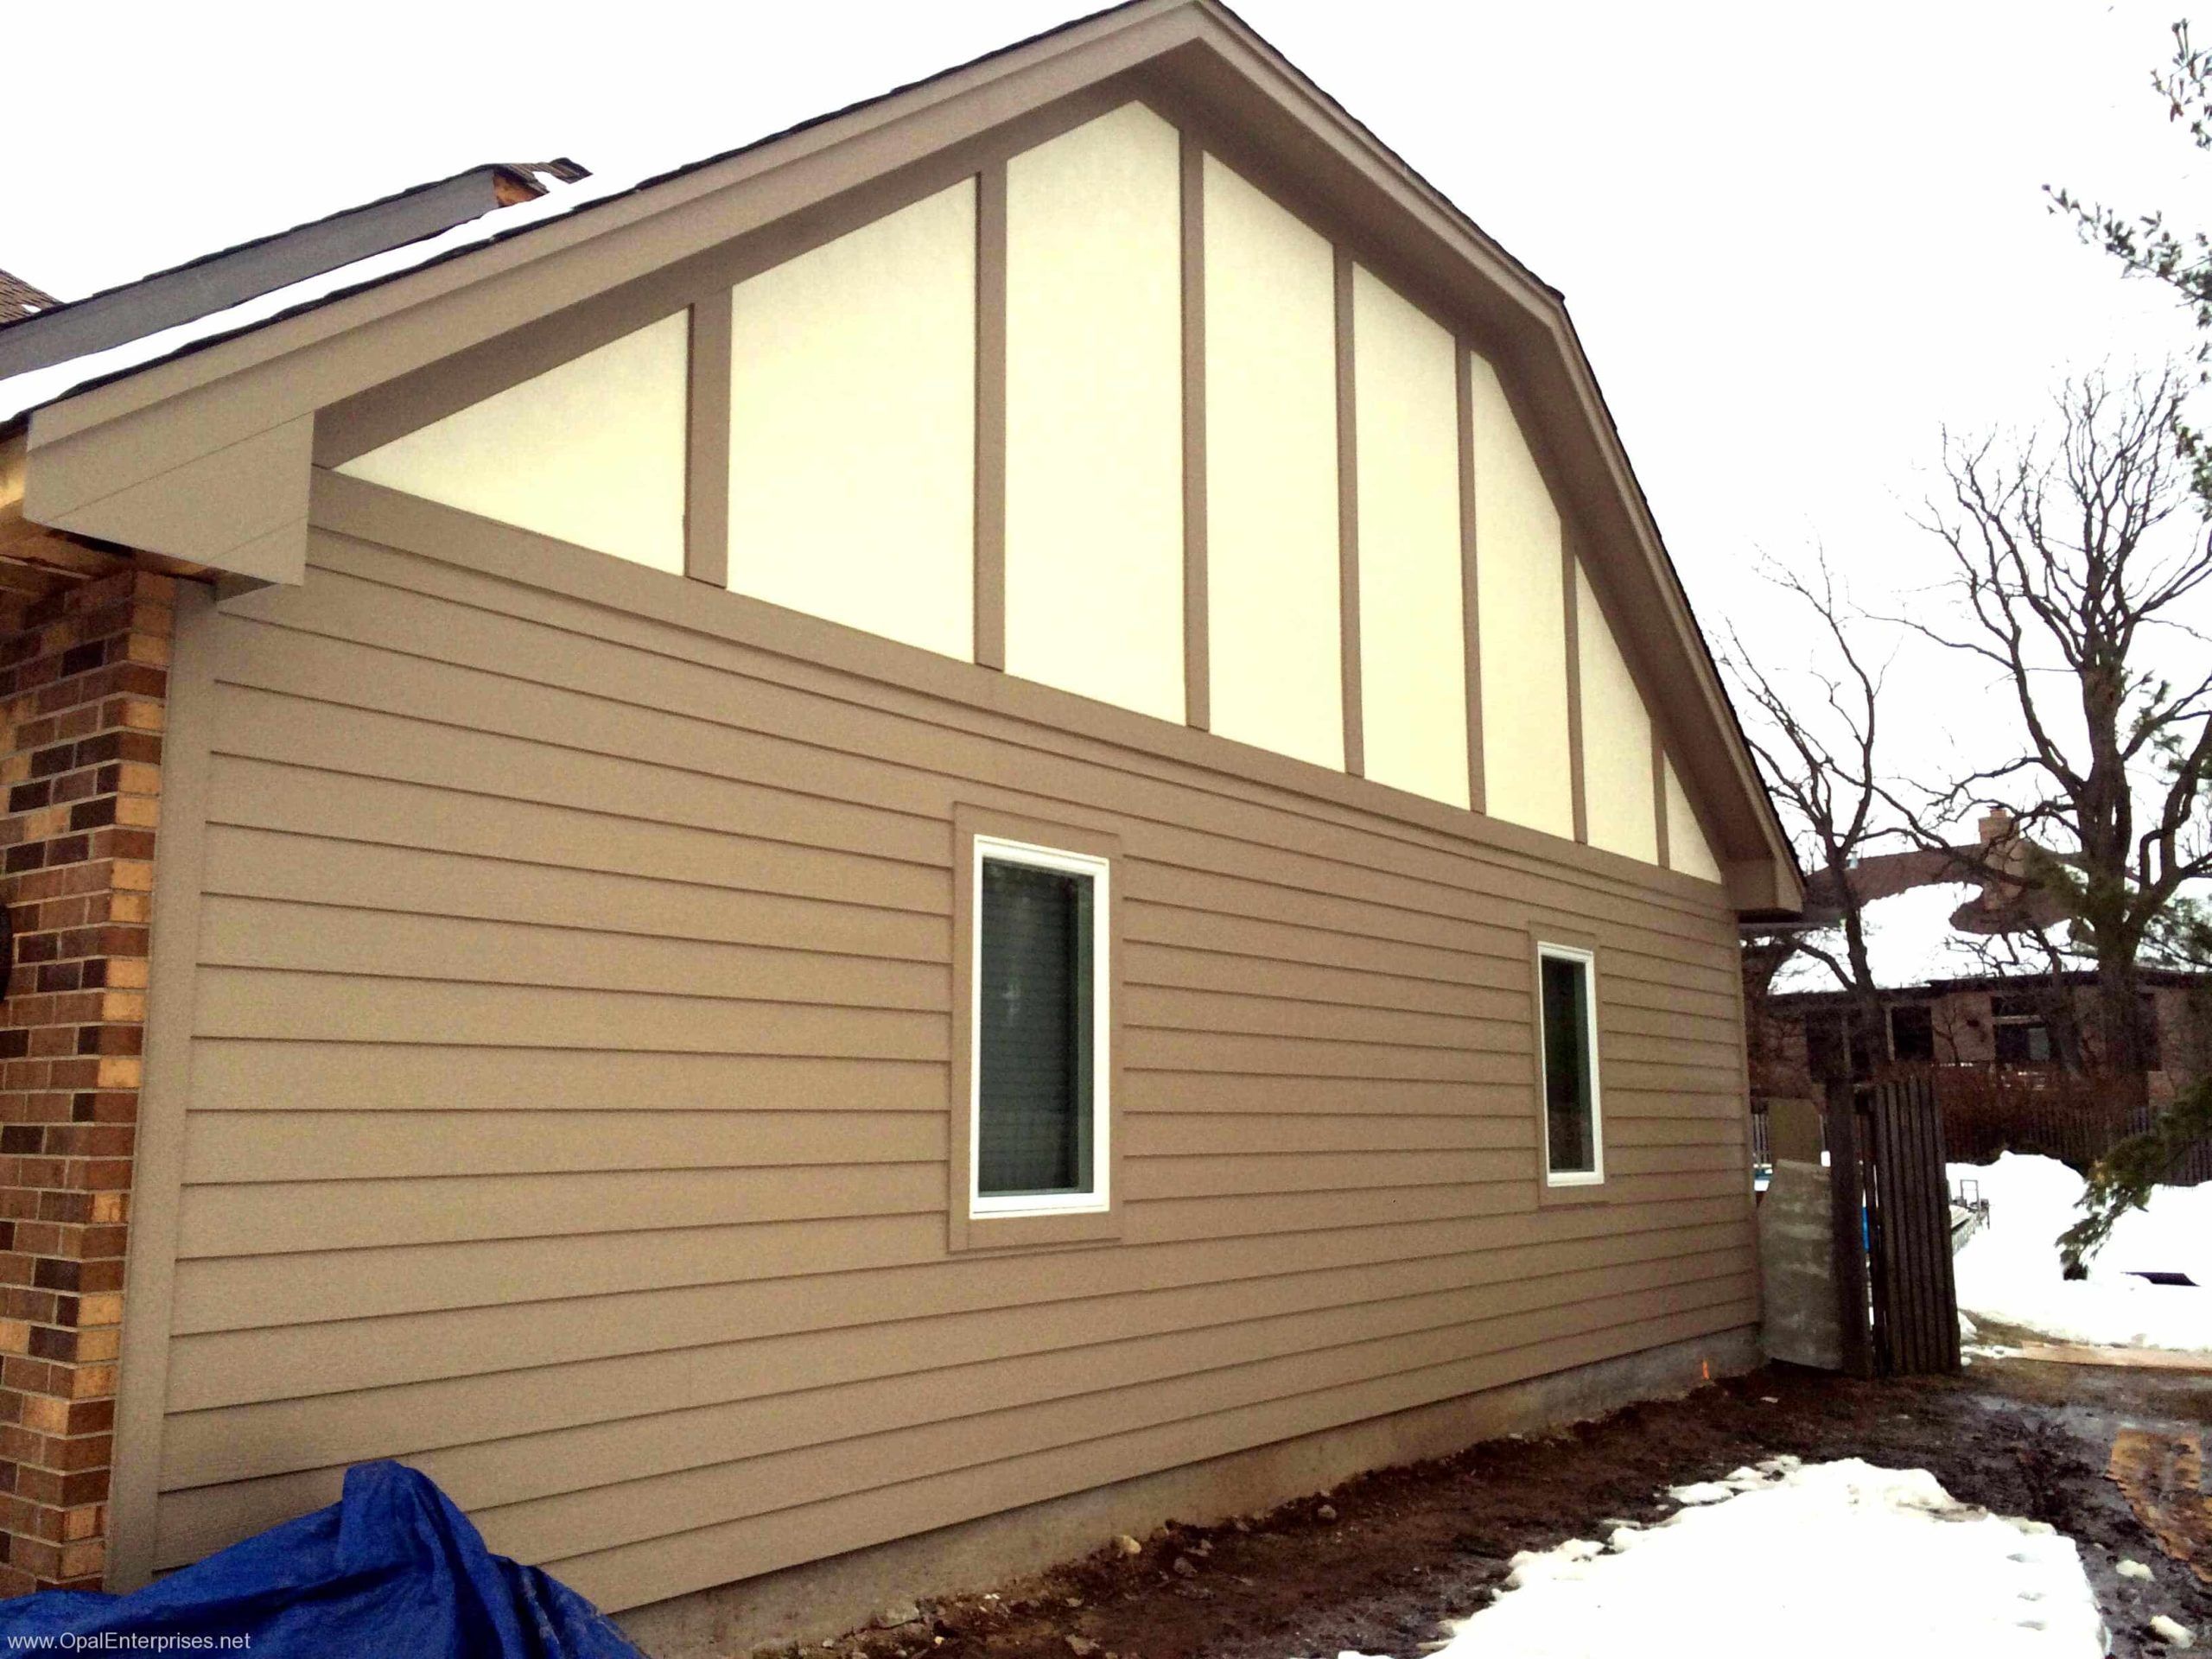 Renovation in Naperville with James Hardie Siding